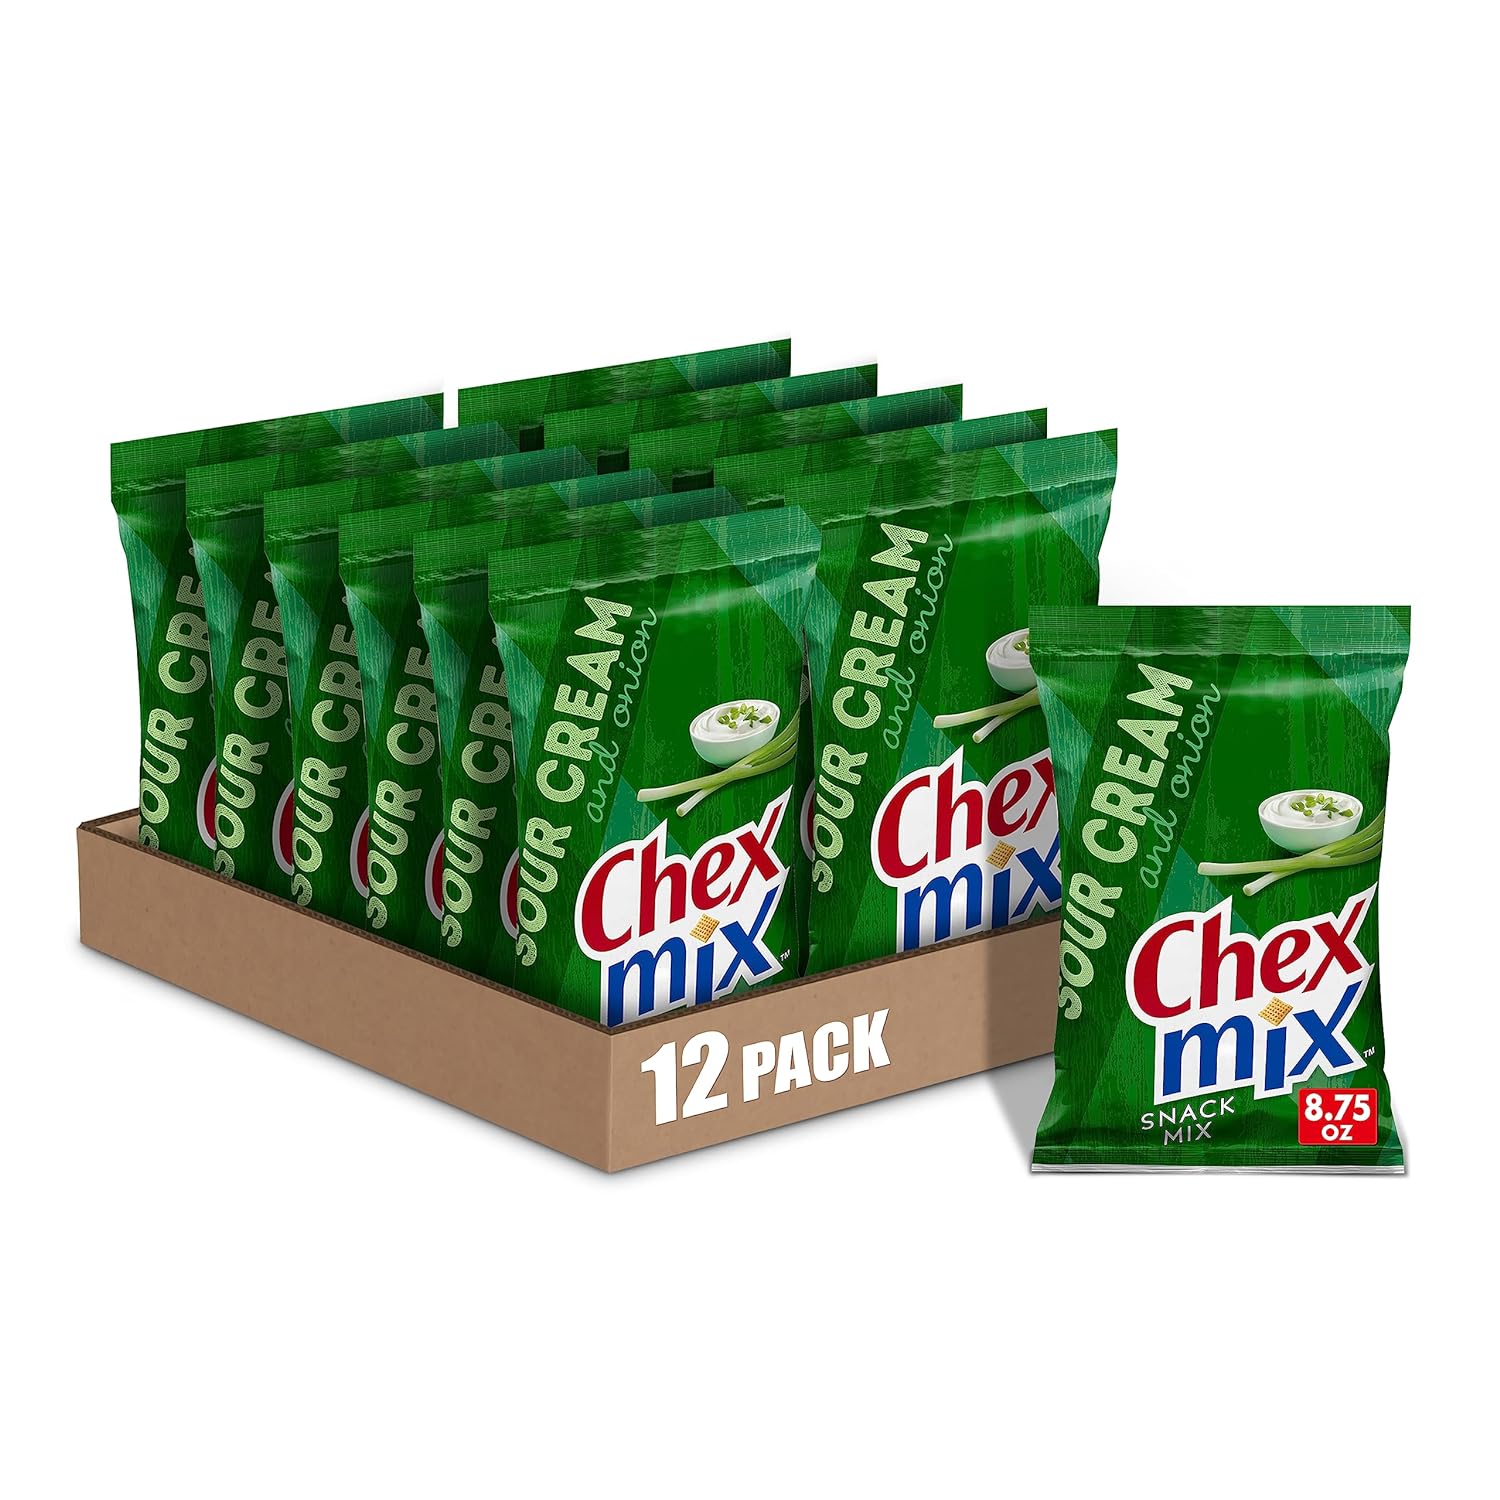 Chex Mix Snack Party Mix, Sour Cream and Onion, Pub Mix Snack Bag, 8.75 oz (Pack of 12)